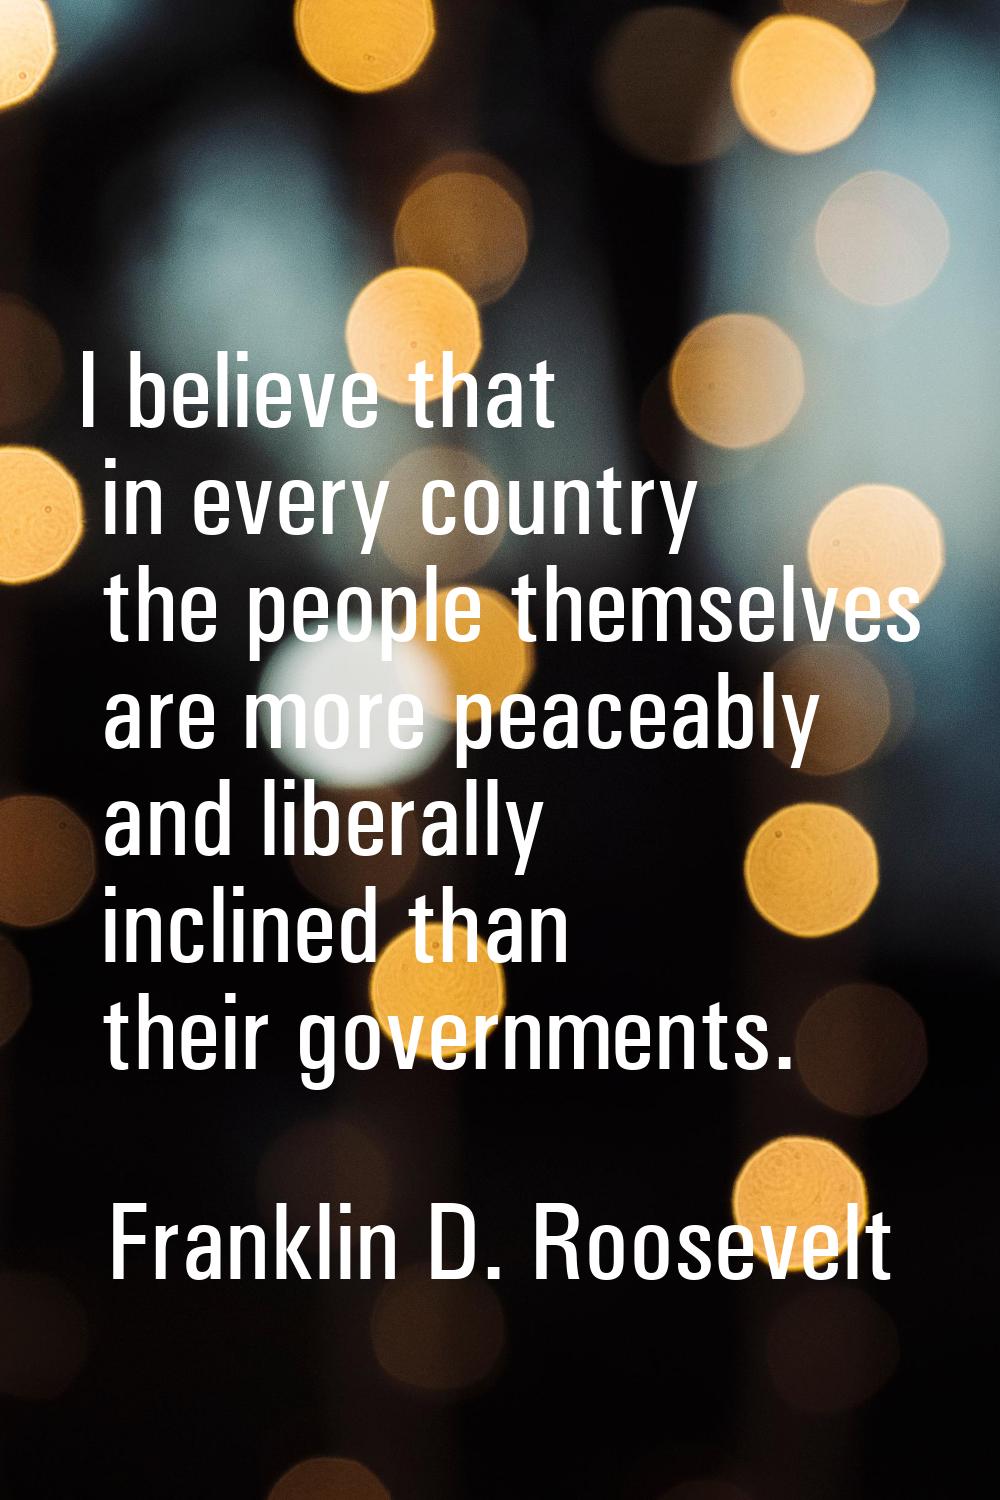 I believe that in every country the people themselves are more peaceably and liberally inclined tha